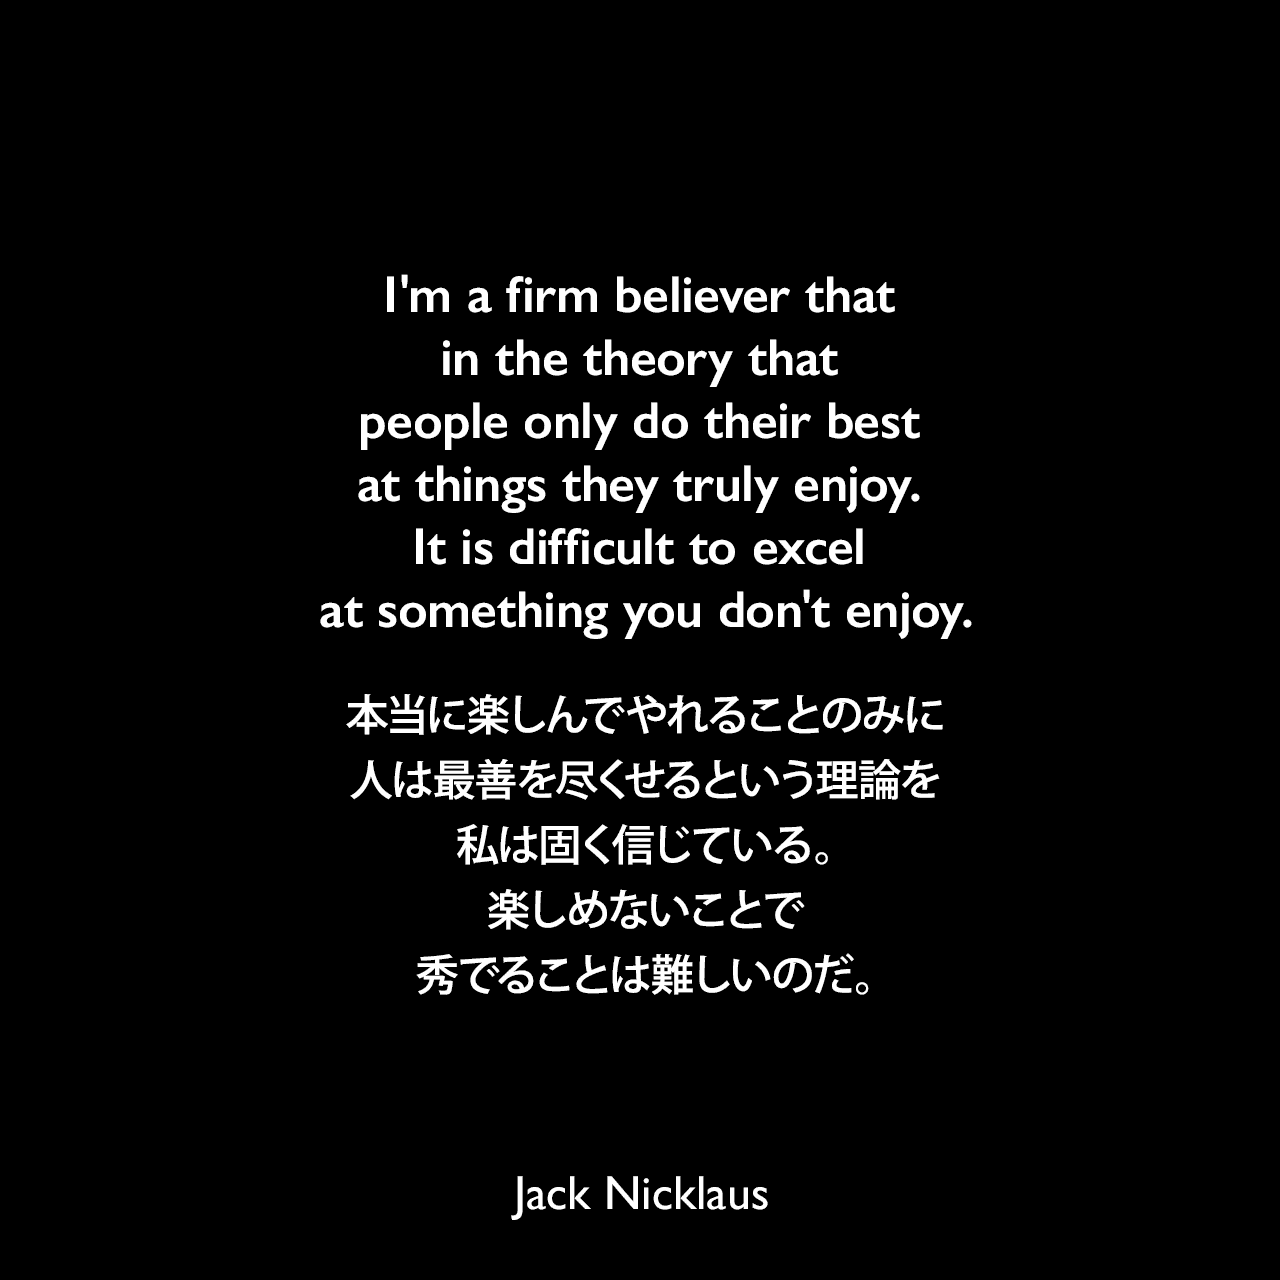 I’m a firm believer that in the theory that people only do their best at things they truly enjoy. It is difficult to excel at something you don’t enjoy.本当に楽しんでやれることのみに、人は最善を尽くせるという理論を私は固く信じている。楽しめないことで秀でることは難しいのだ。